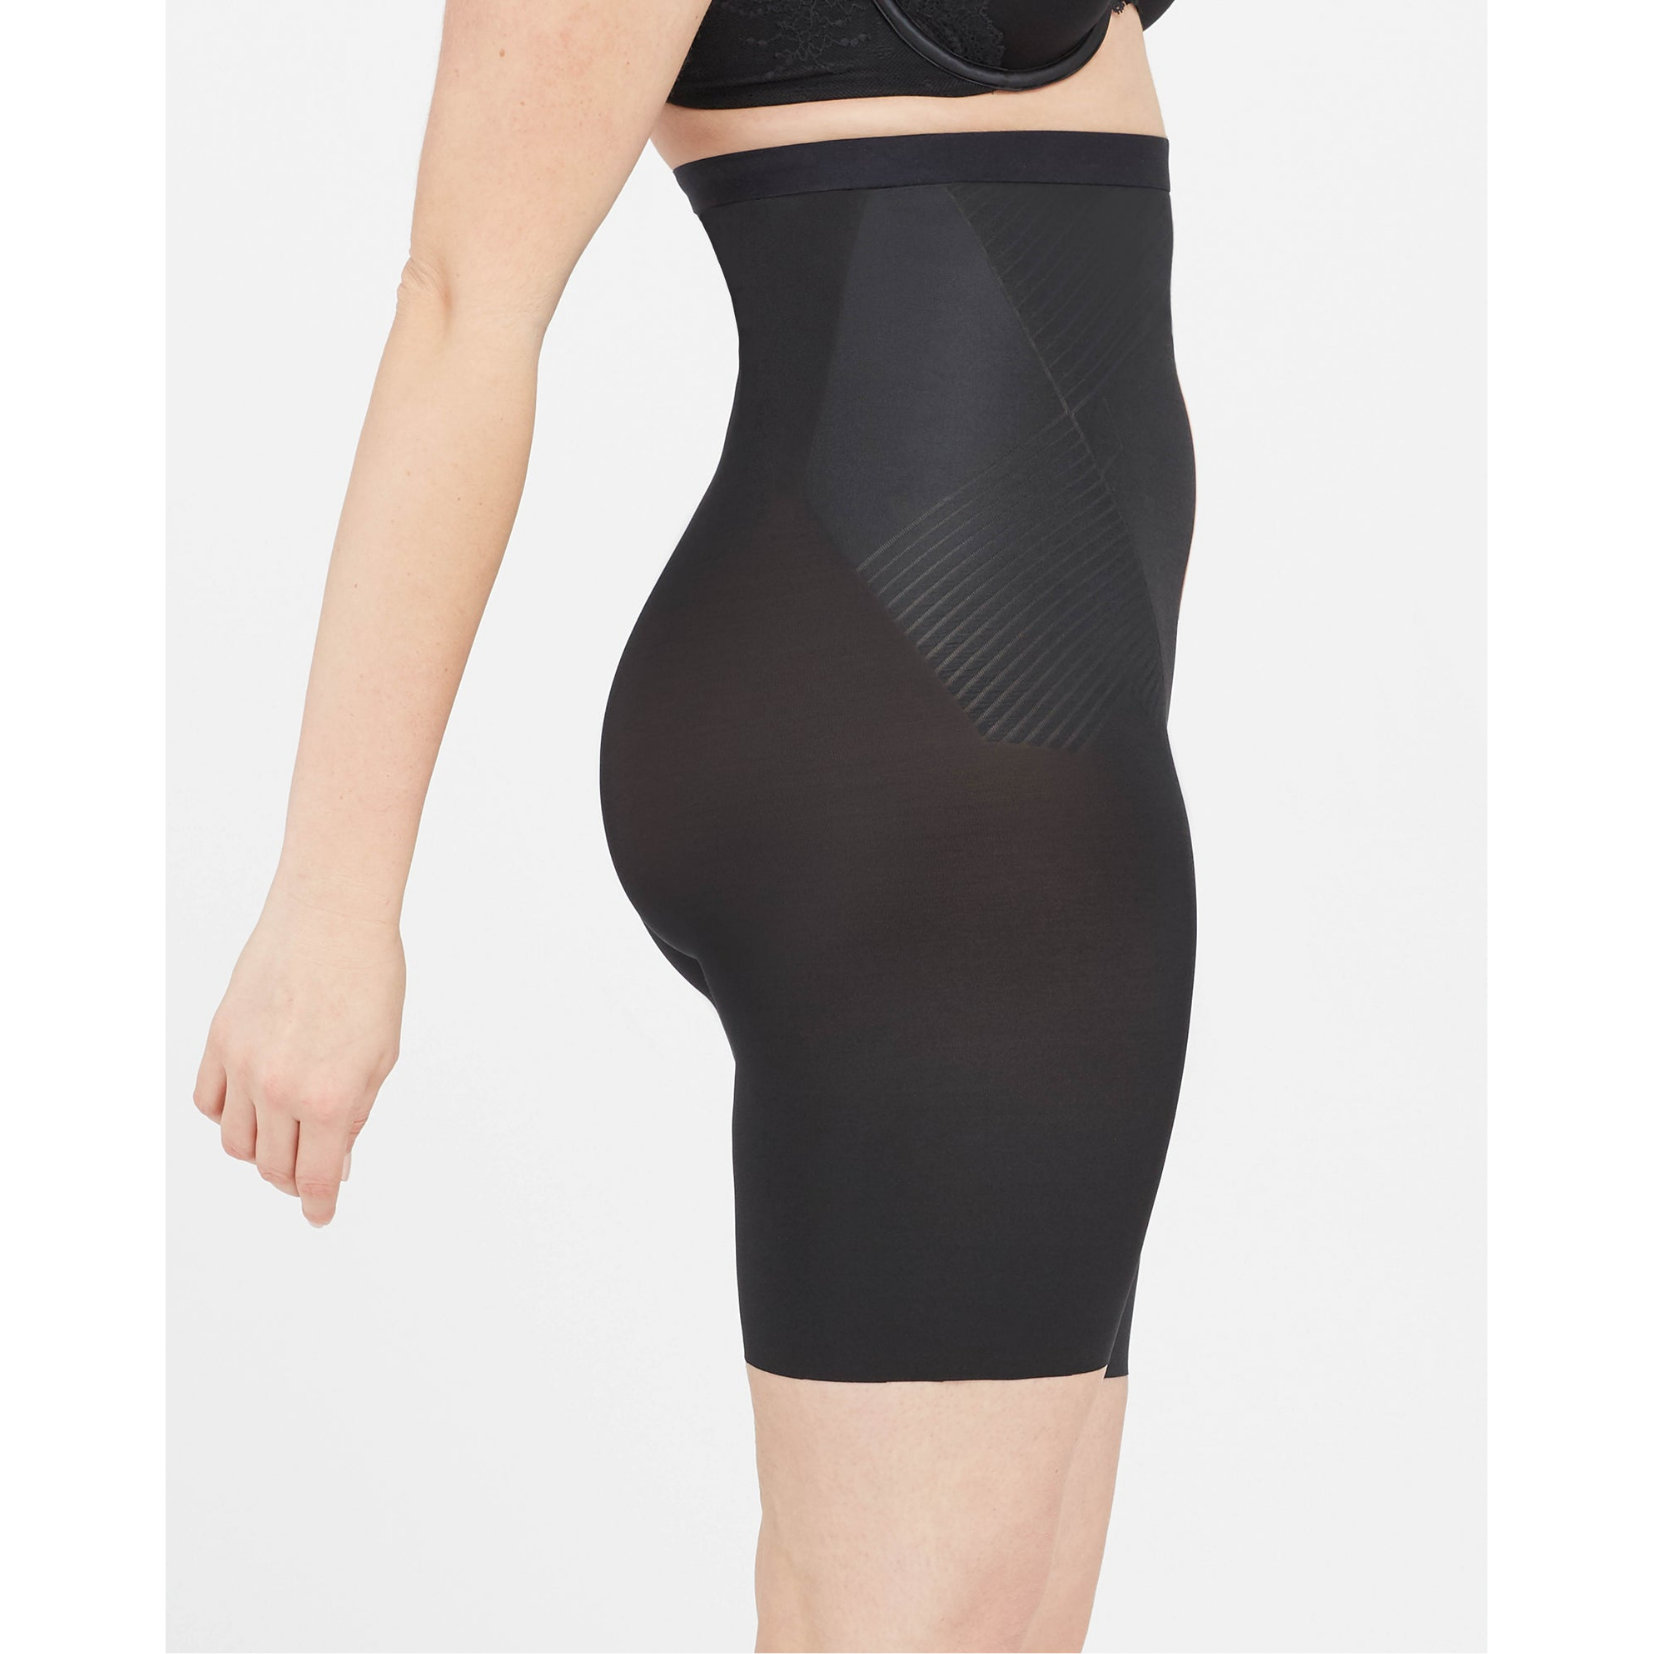 Thinstincts 2.0 High-Waisted Mid-Thigh Short - LA FIGURE